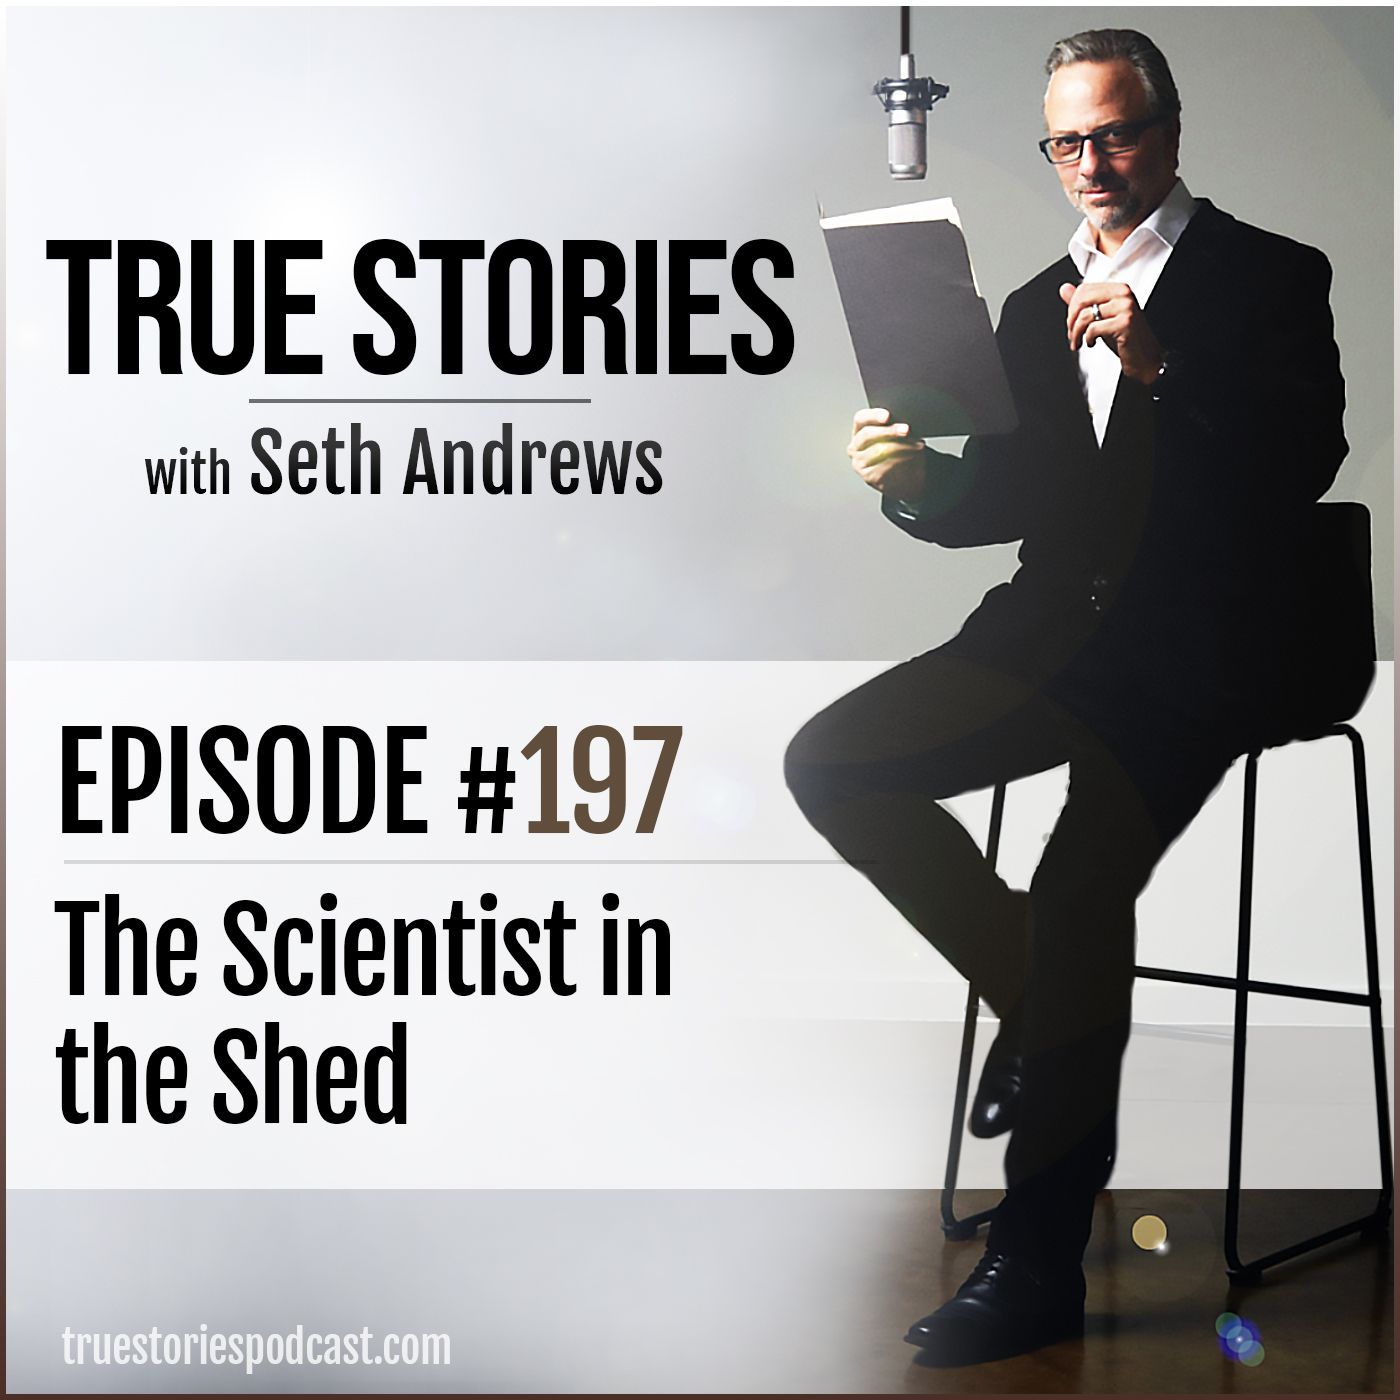 True Stories #197 - The Scientist in the Shed